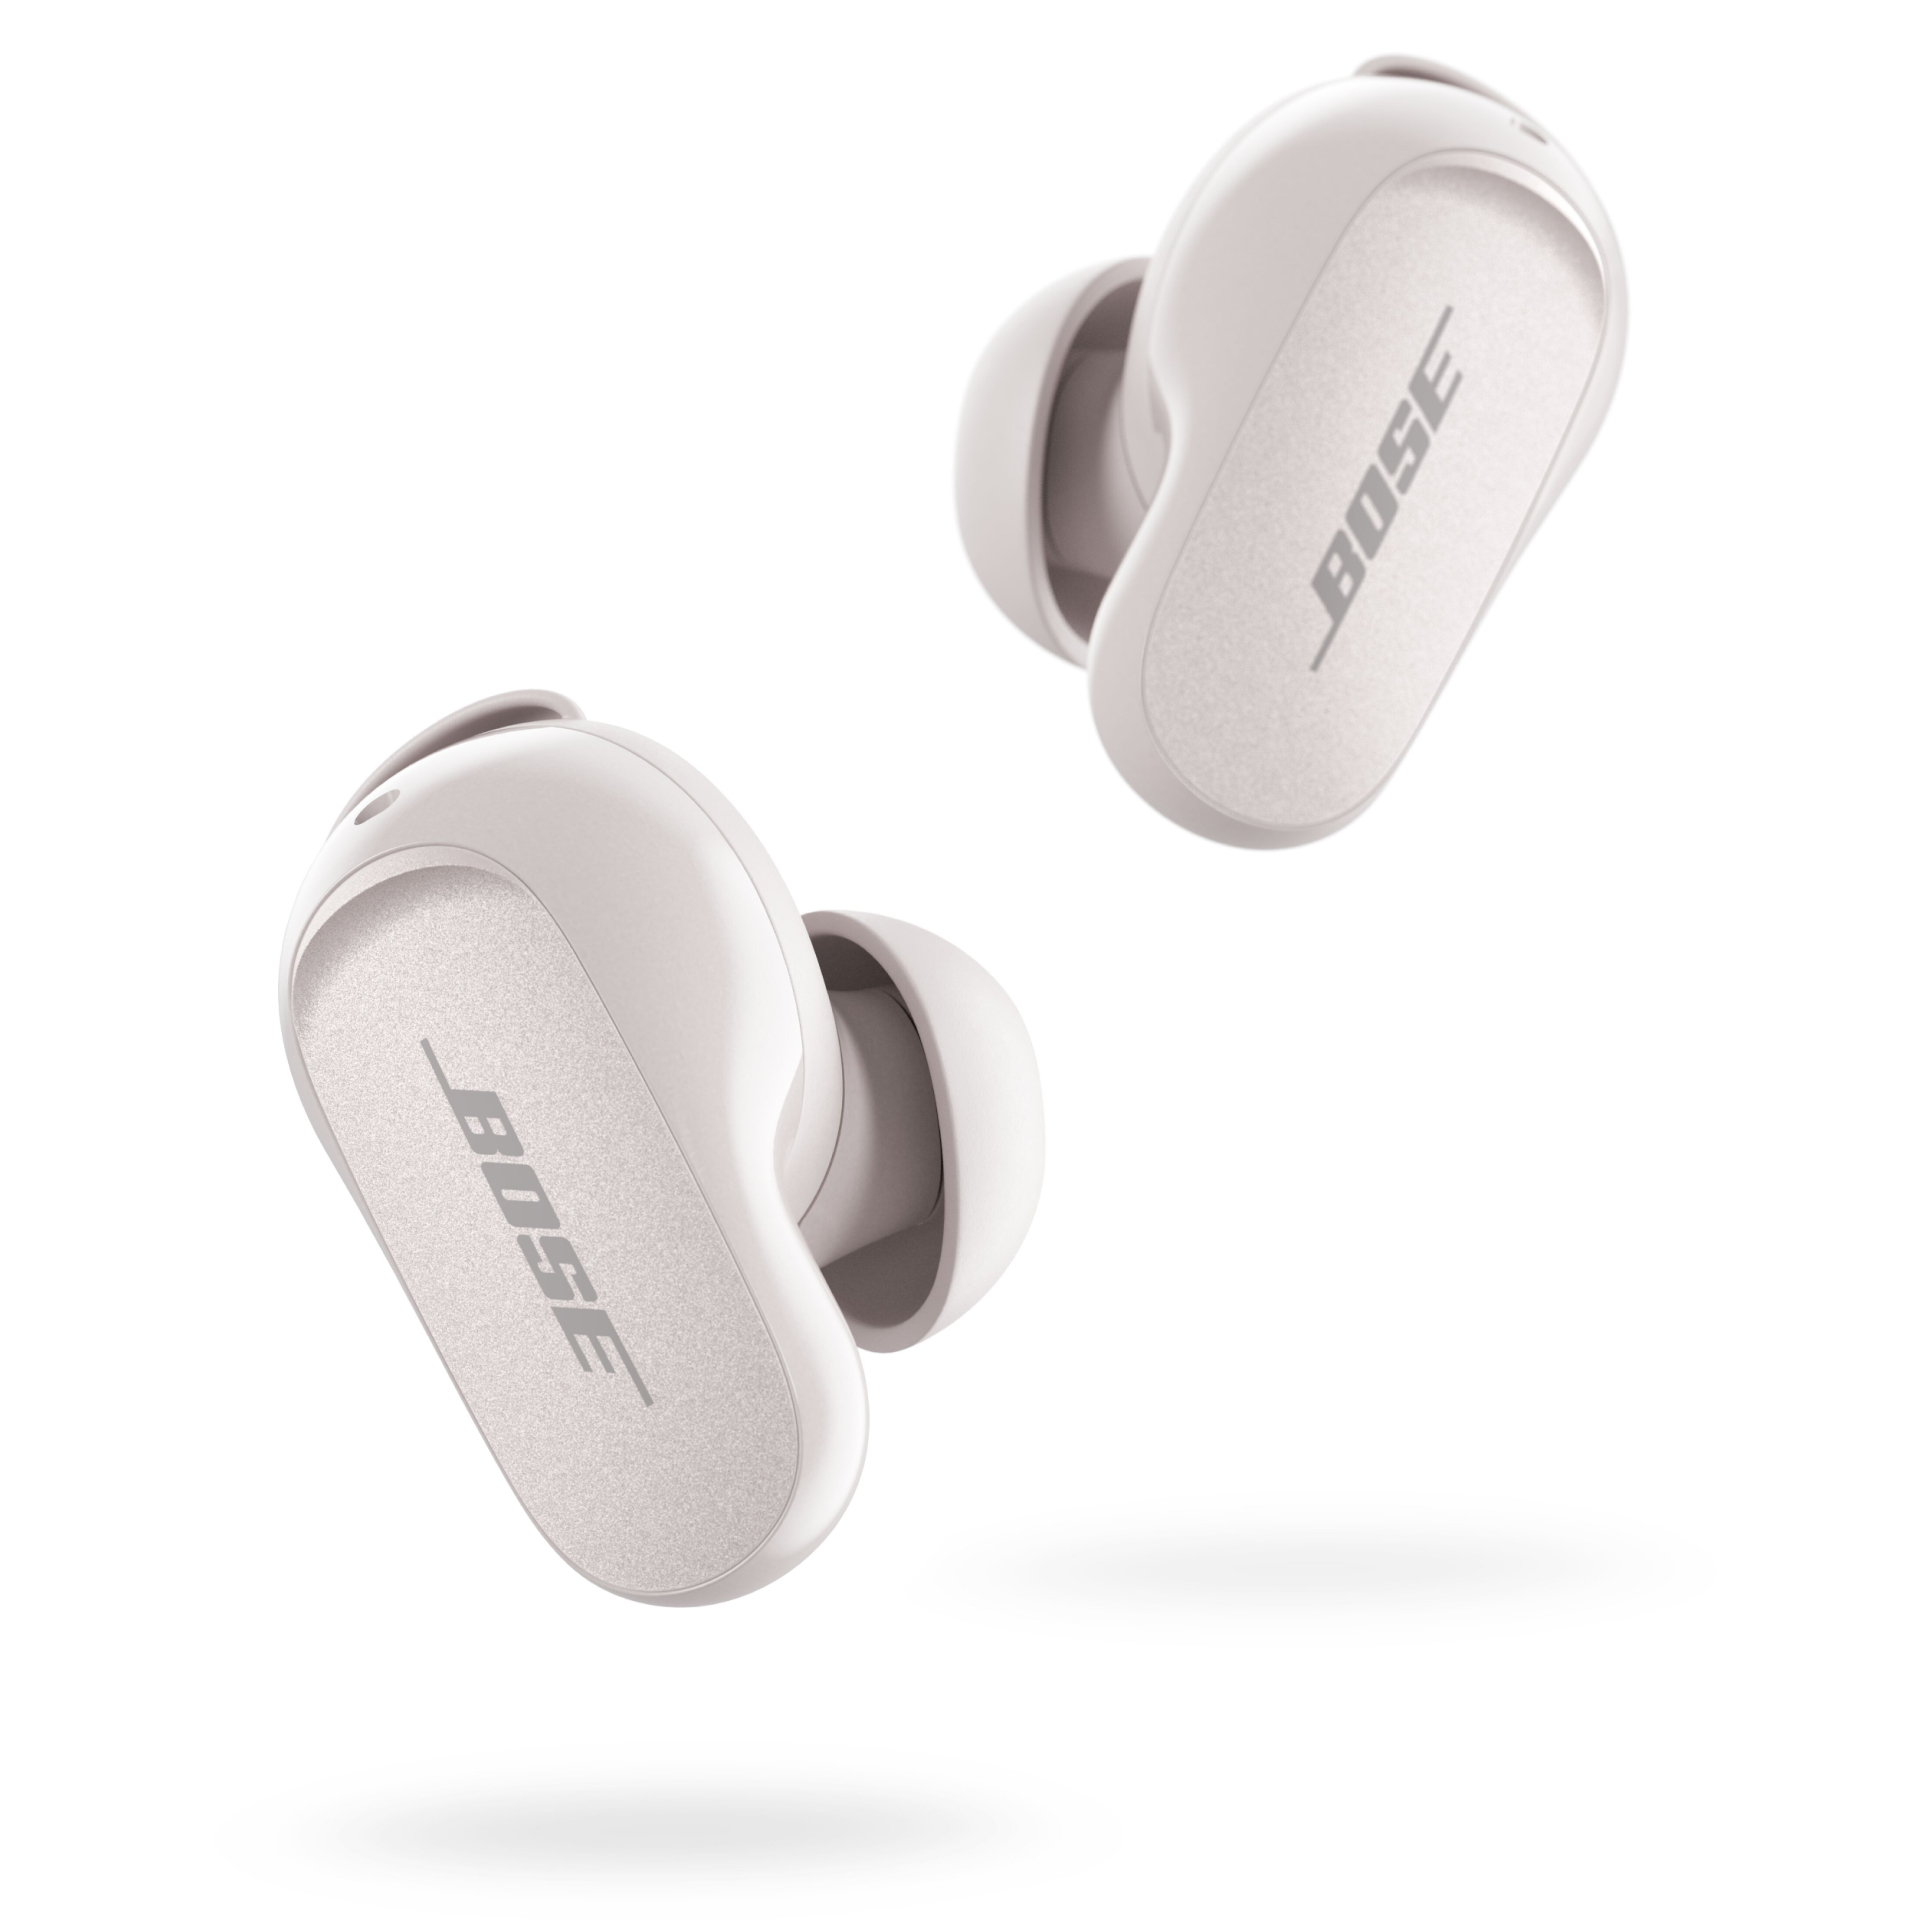 Bose Bose Quiet Comfort Noise Cancelling Wireless Bluetooth Earbuds Black BRAND NEW-, 